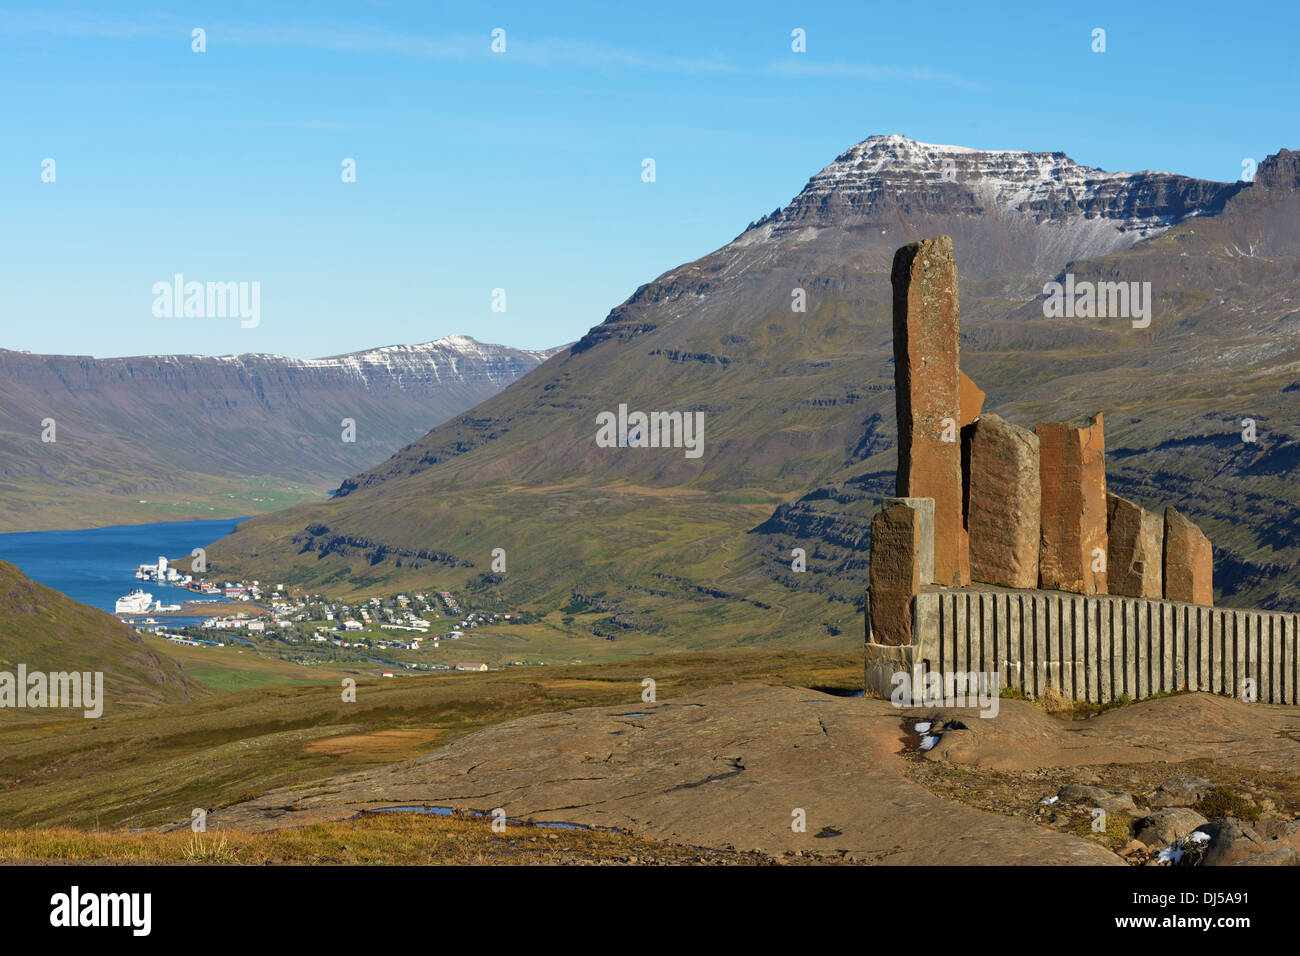 Monument representing A Link Between Egilsstadir And Seydisfjordur, Seydisfjordur Can Be Seen In The Valley; Iceland Stock Photo